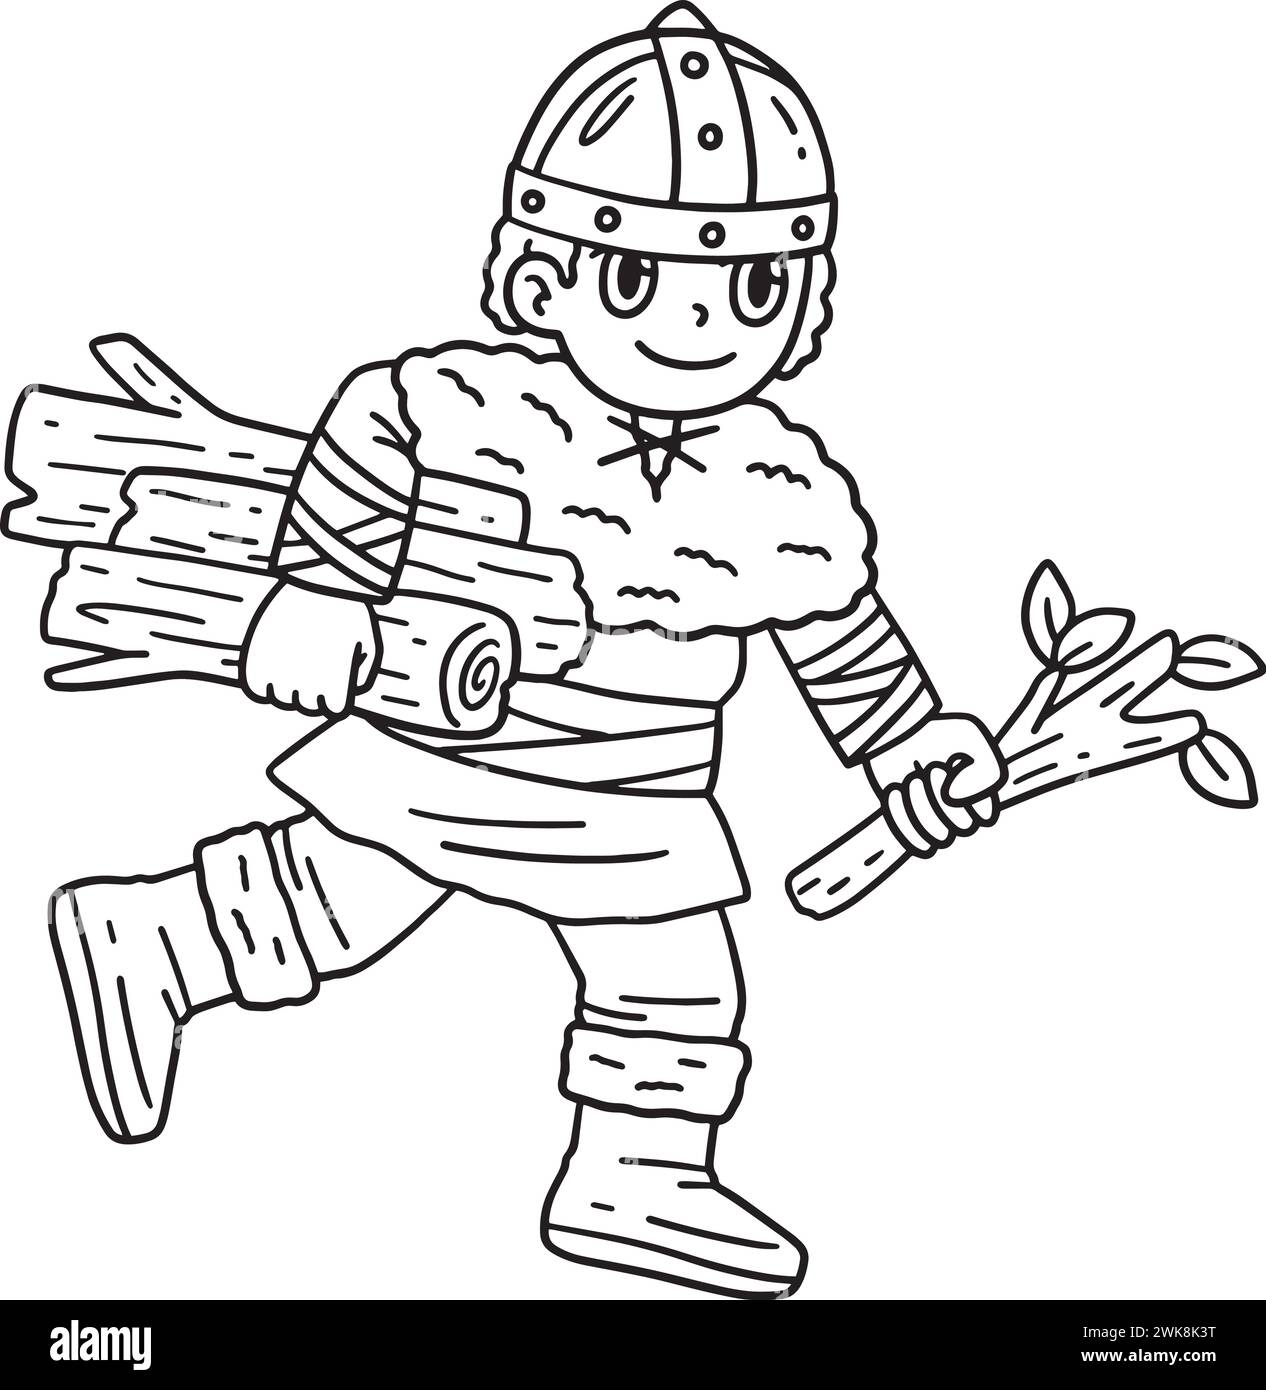 A cute and funny coloring page of a Viking Child Gathering Logs. Provides hours of coloring fun for children. To color, this page is very easy. Suitab Stock Vector